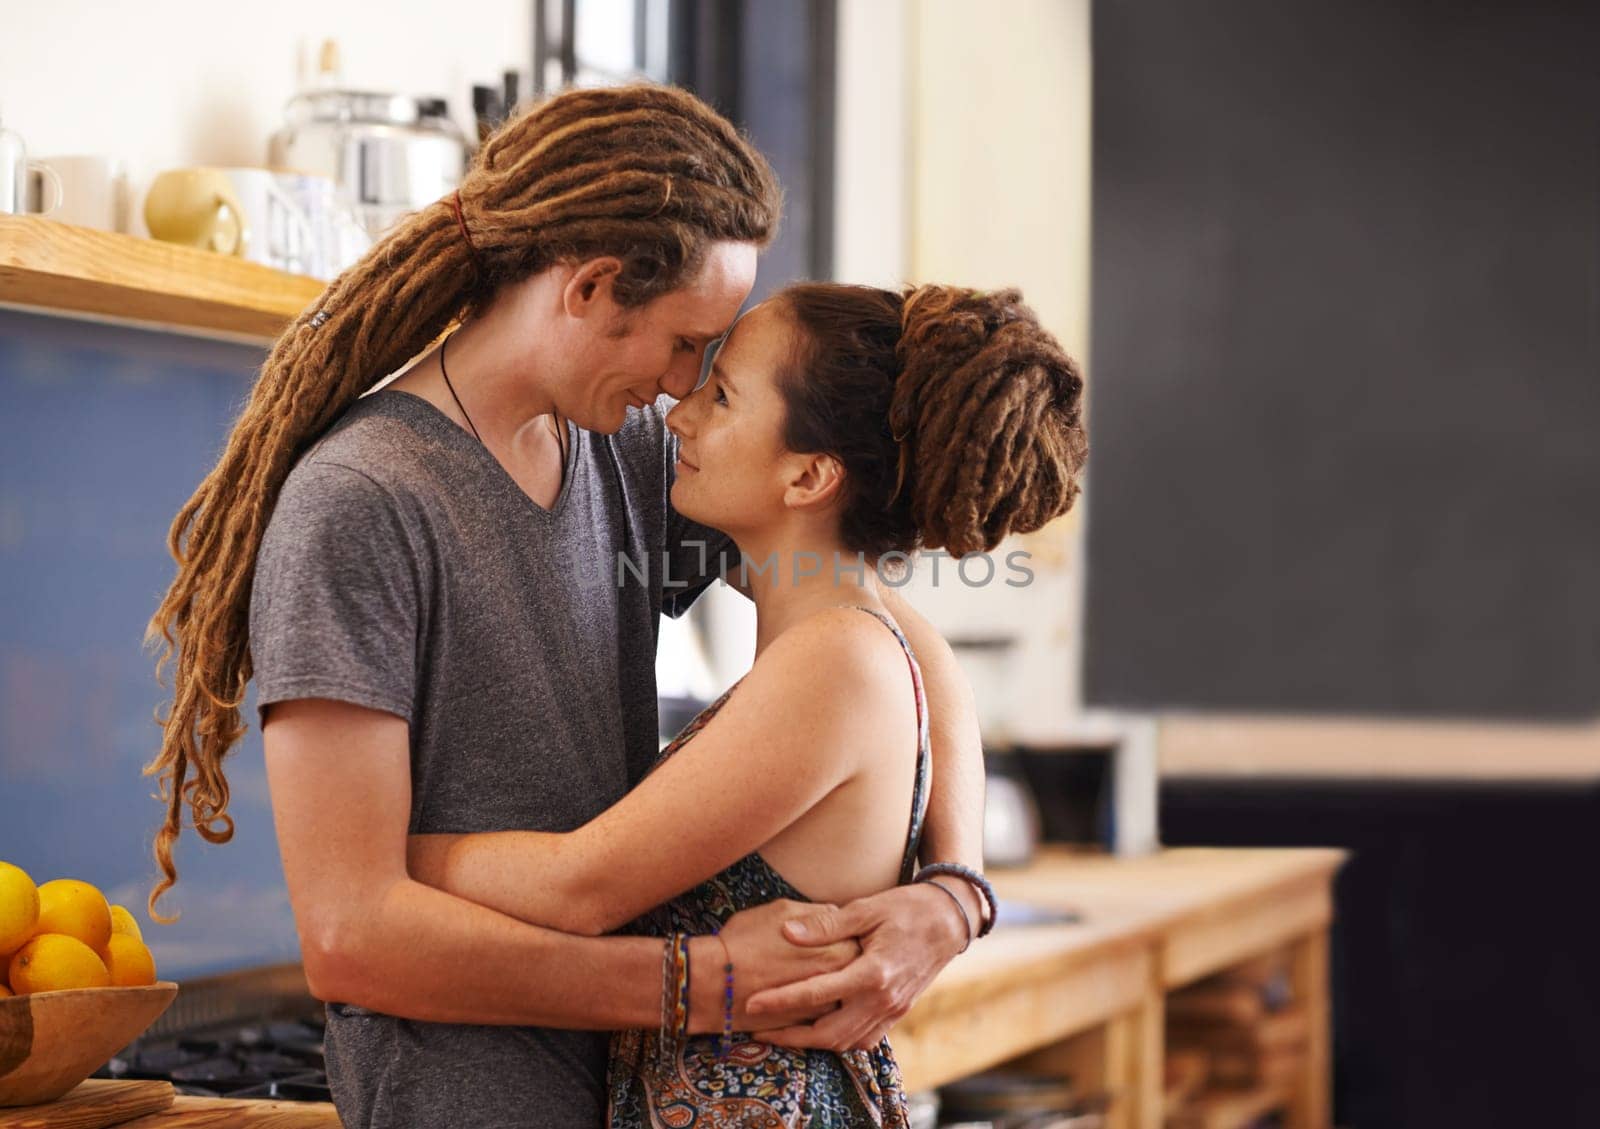 Hug, rasta and home with couple, happiness and bonding together with romance and relaxing. Marriage, apartment and embrace with love and dreadlocks with relationship and cheerful with man and woman.